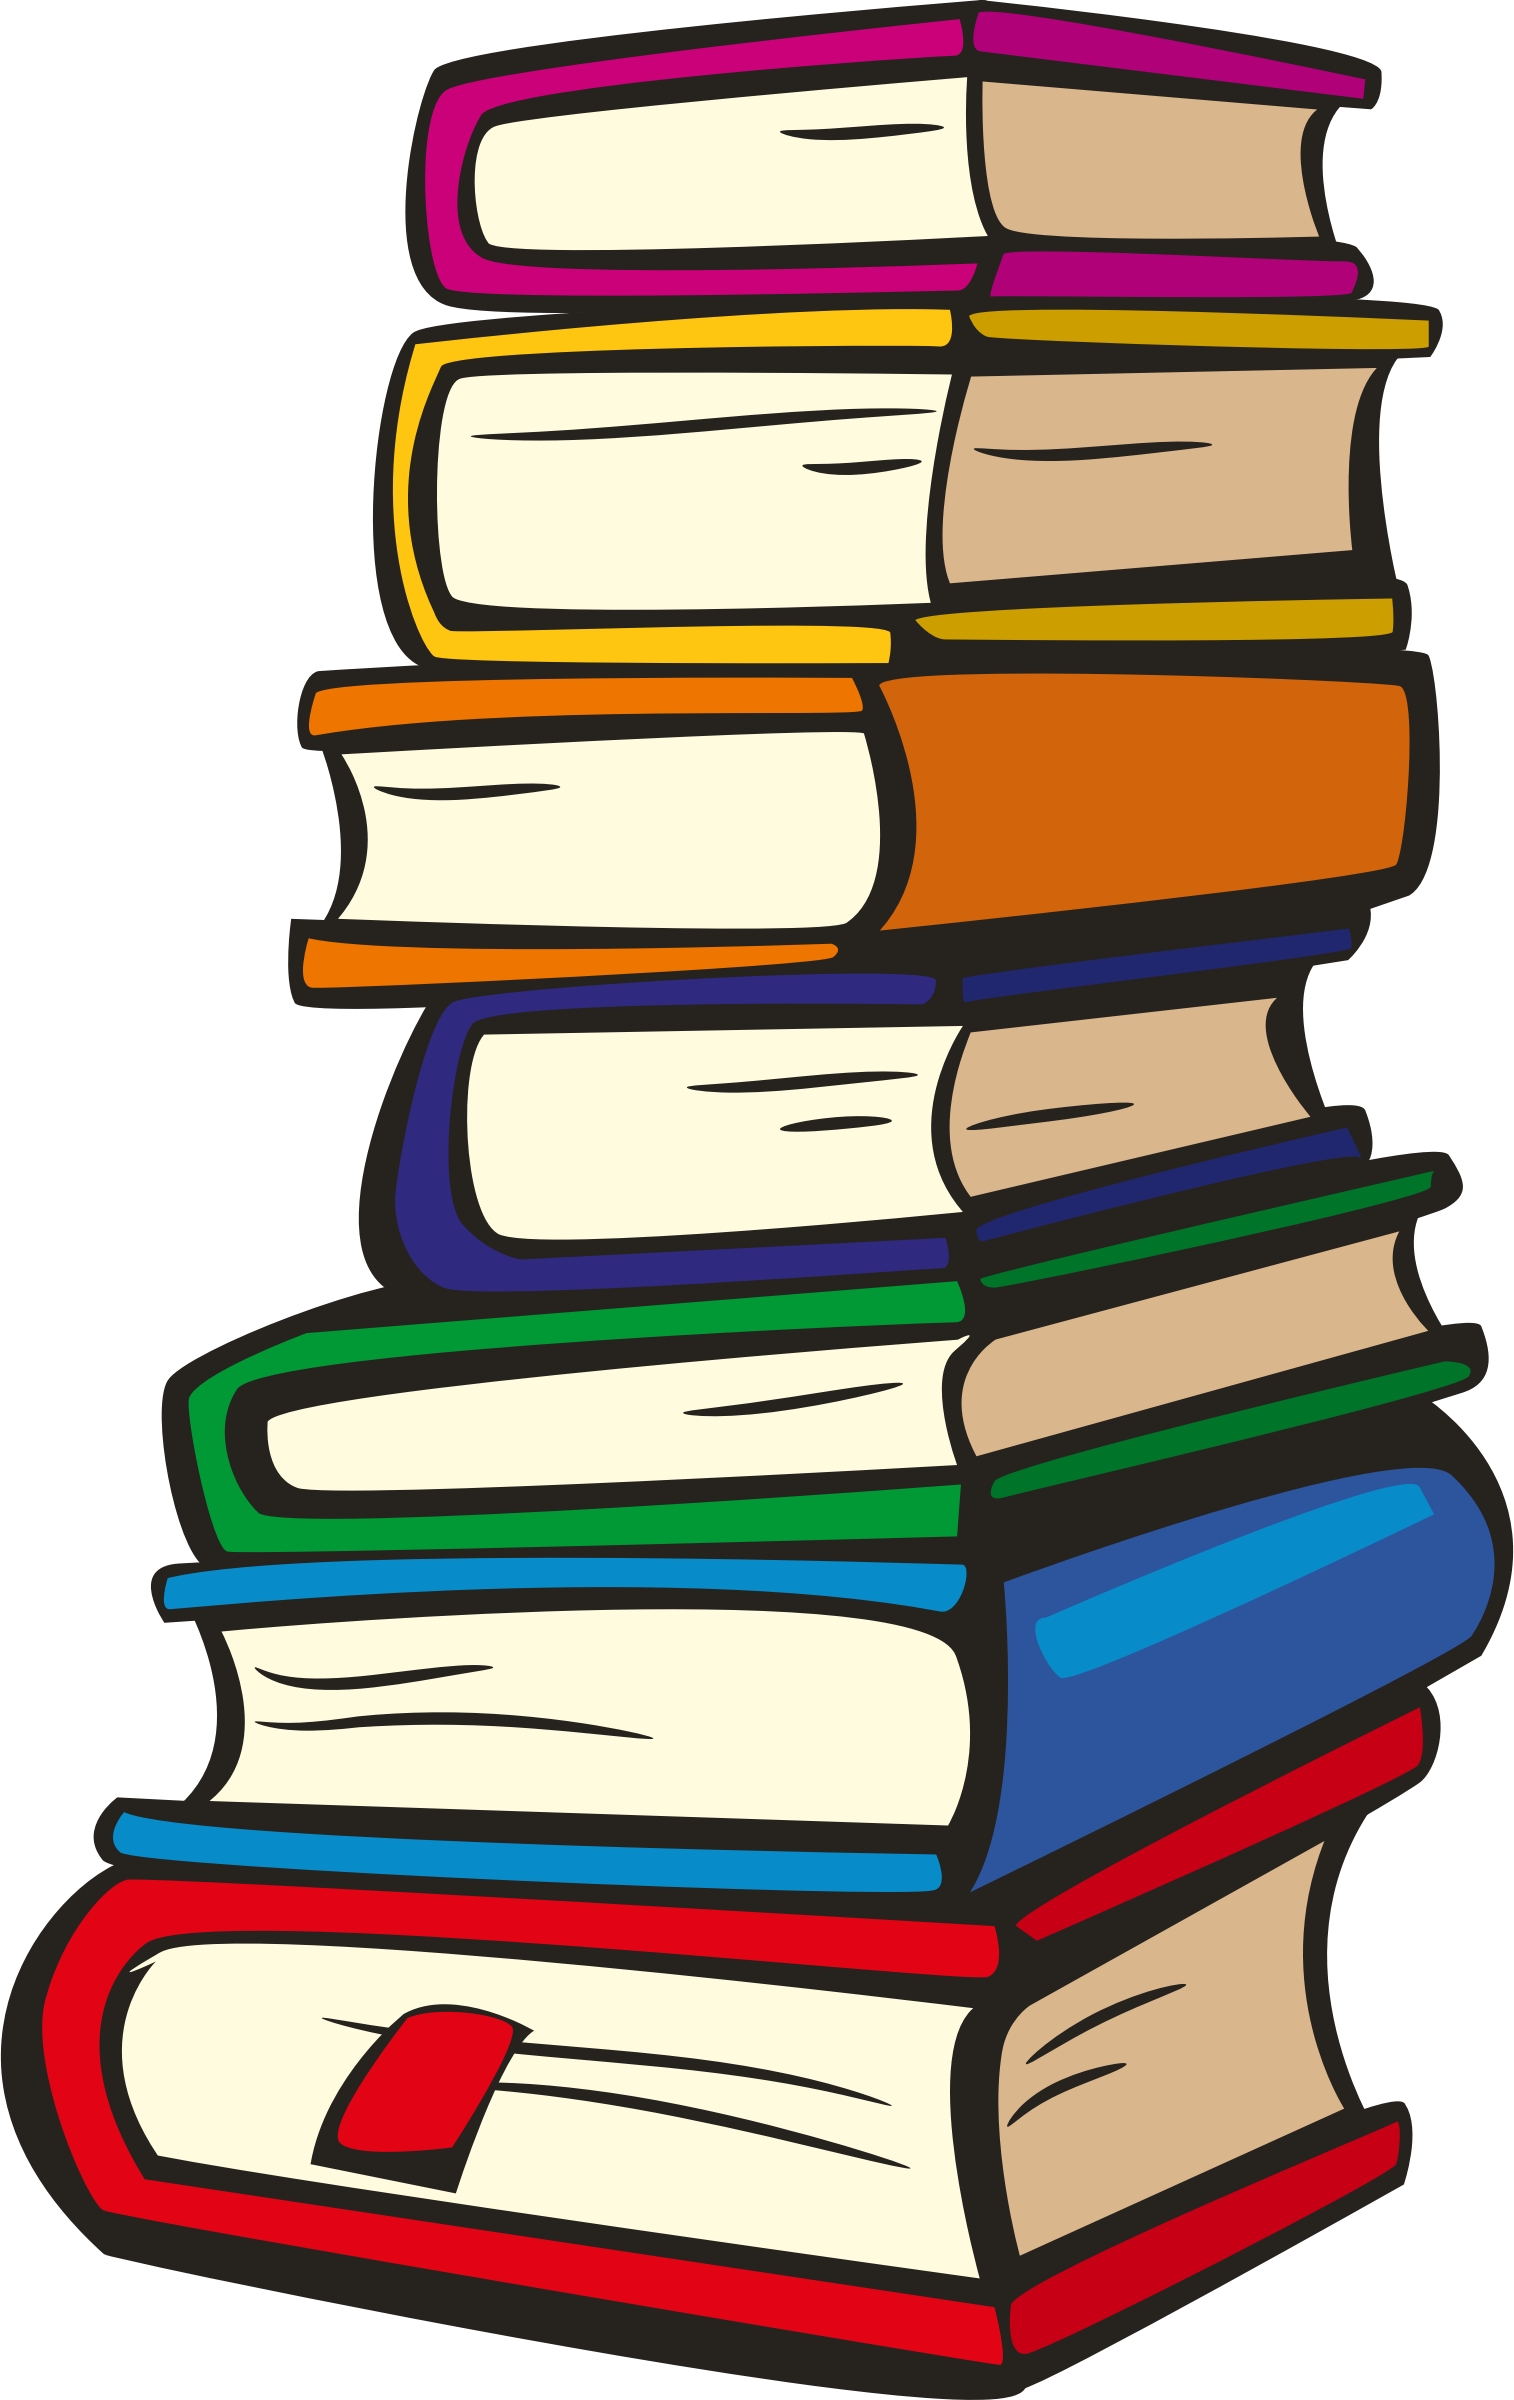 stack of books, painting, sun clip art Png images for design